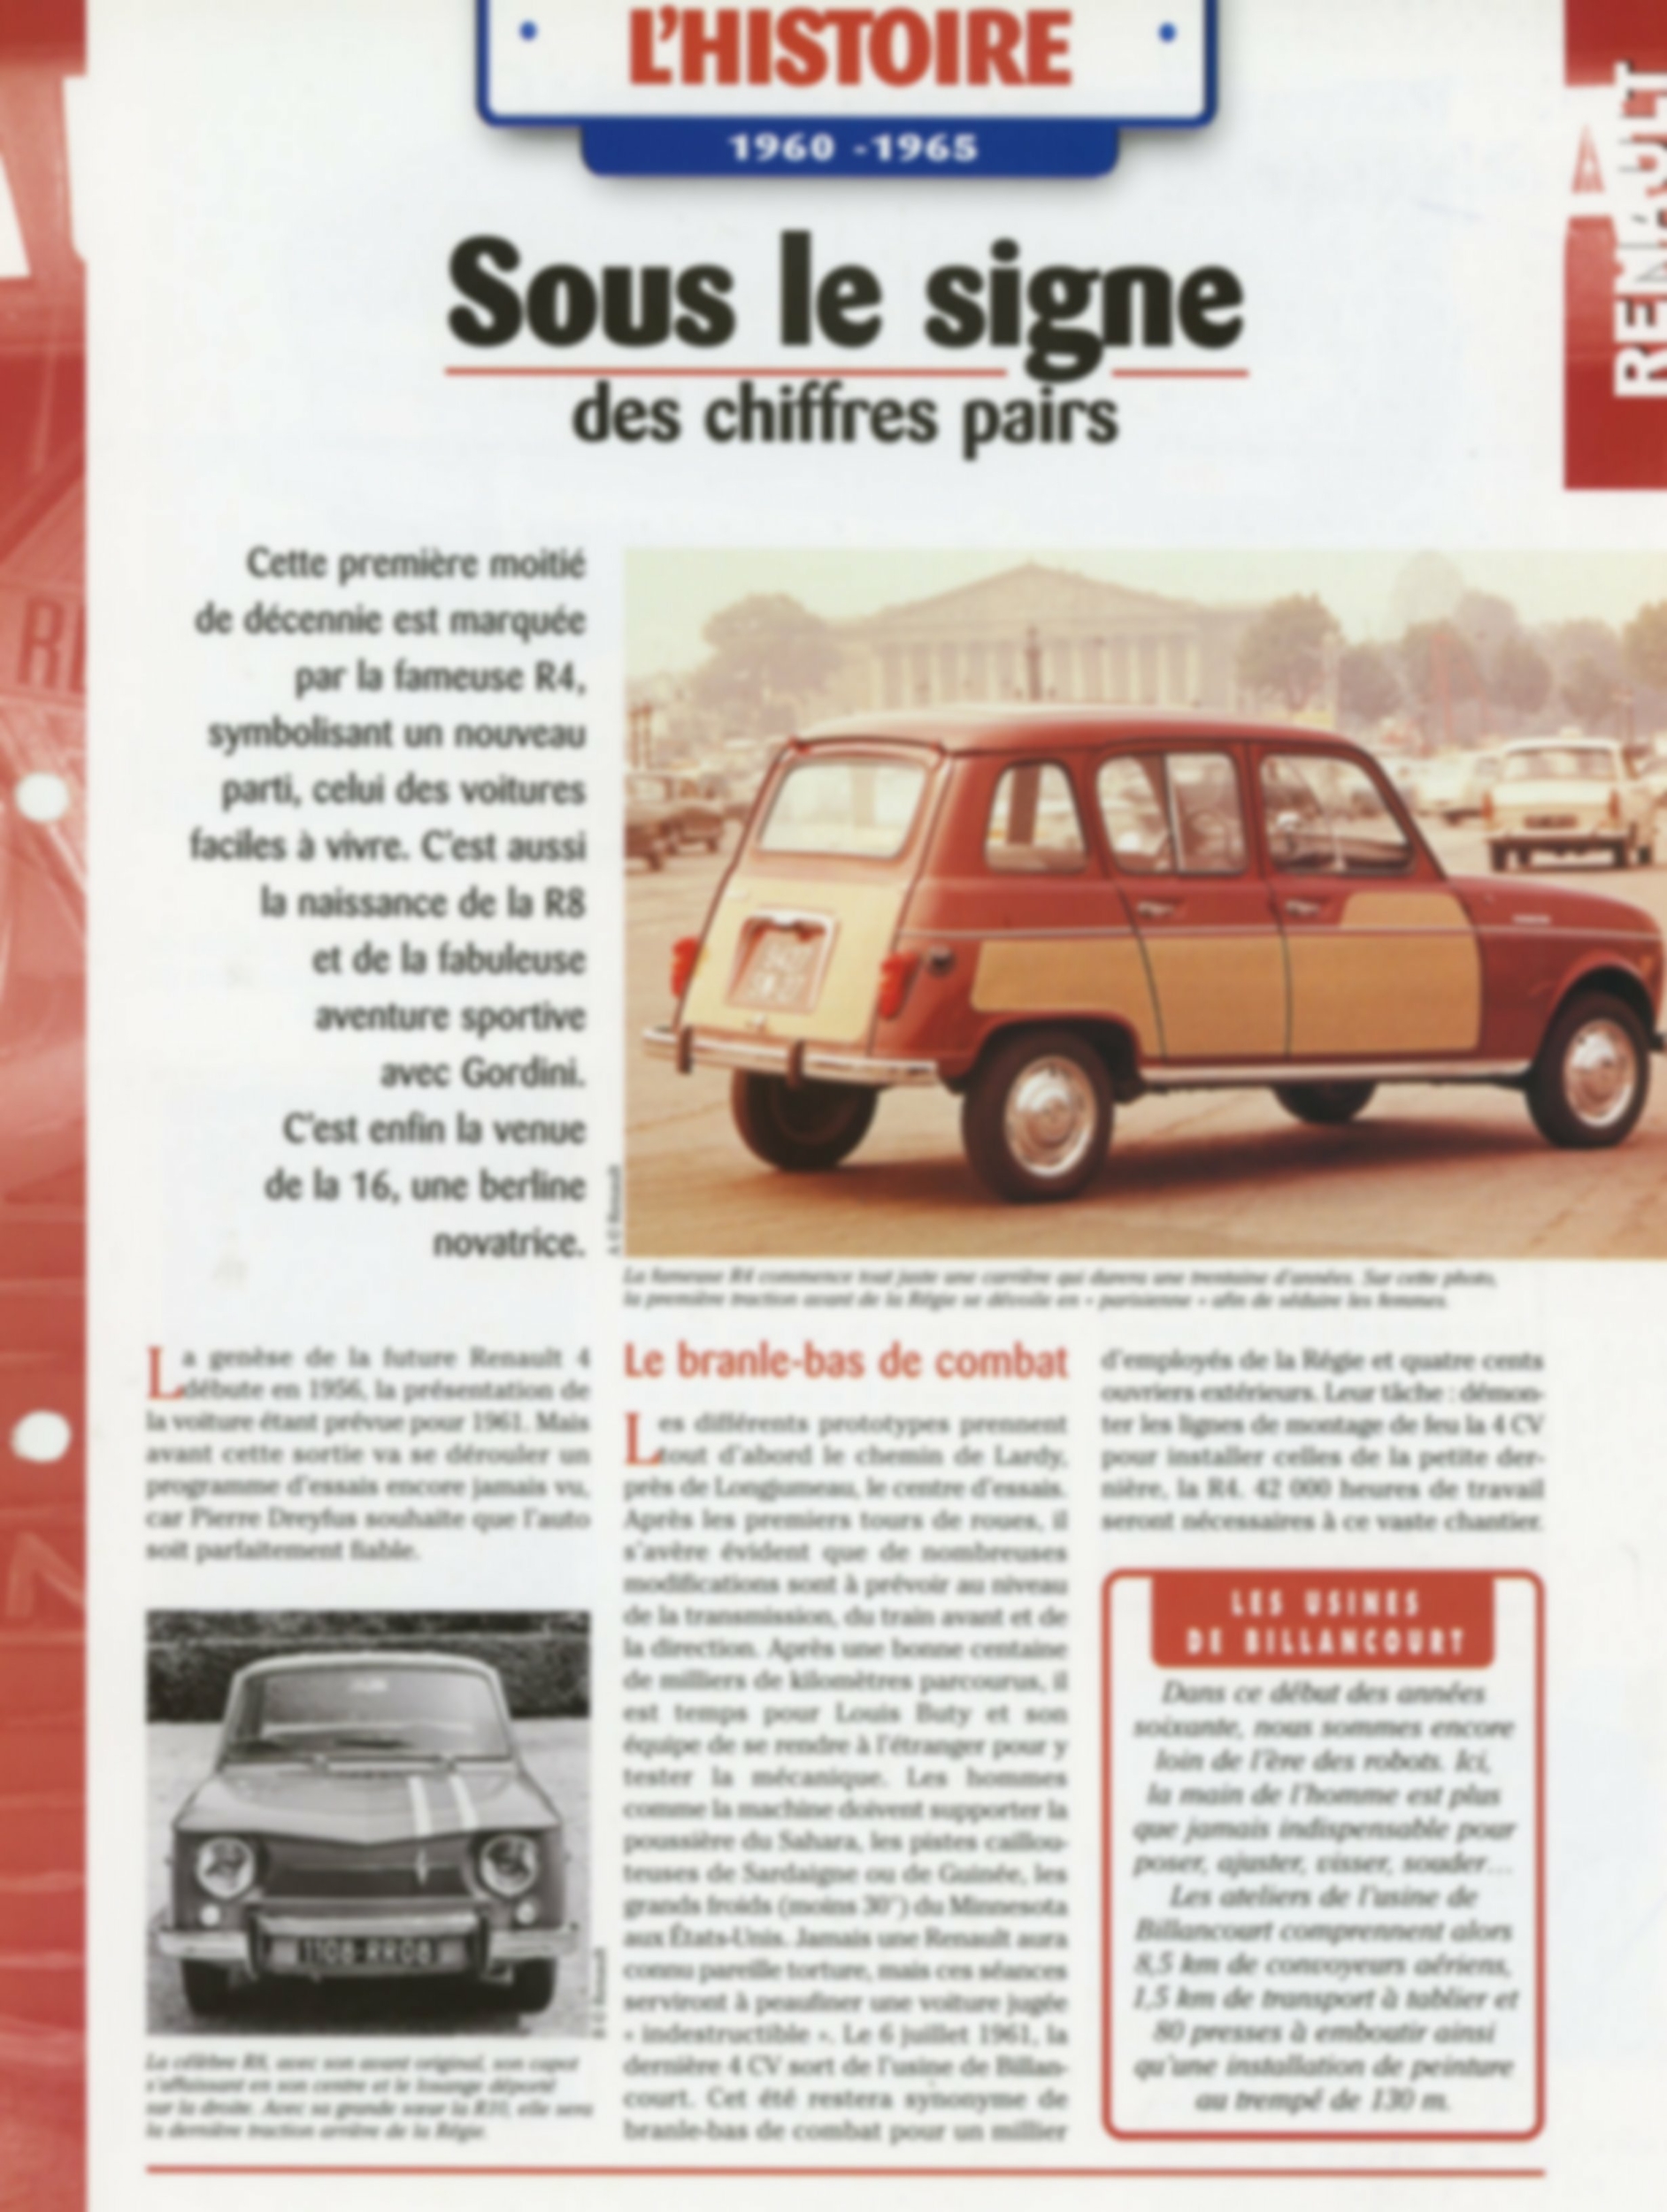 FICHE-AUTO-RENAULT-lemasterbrockers-cars-card-french